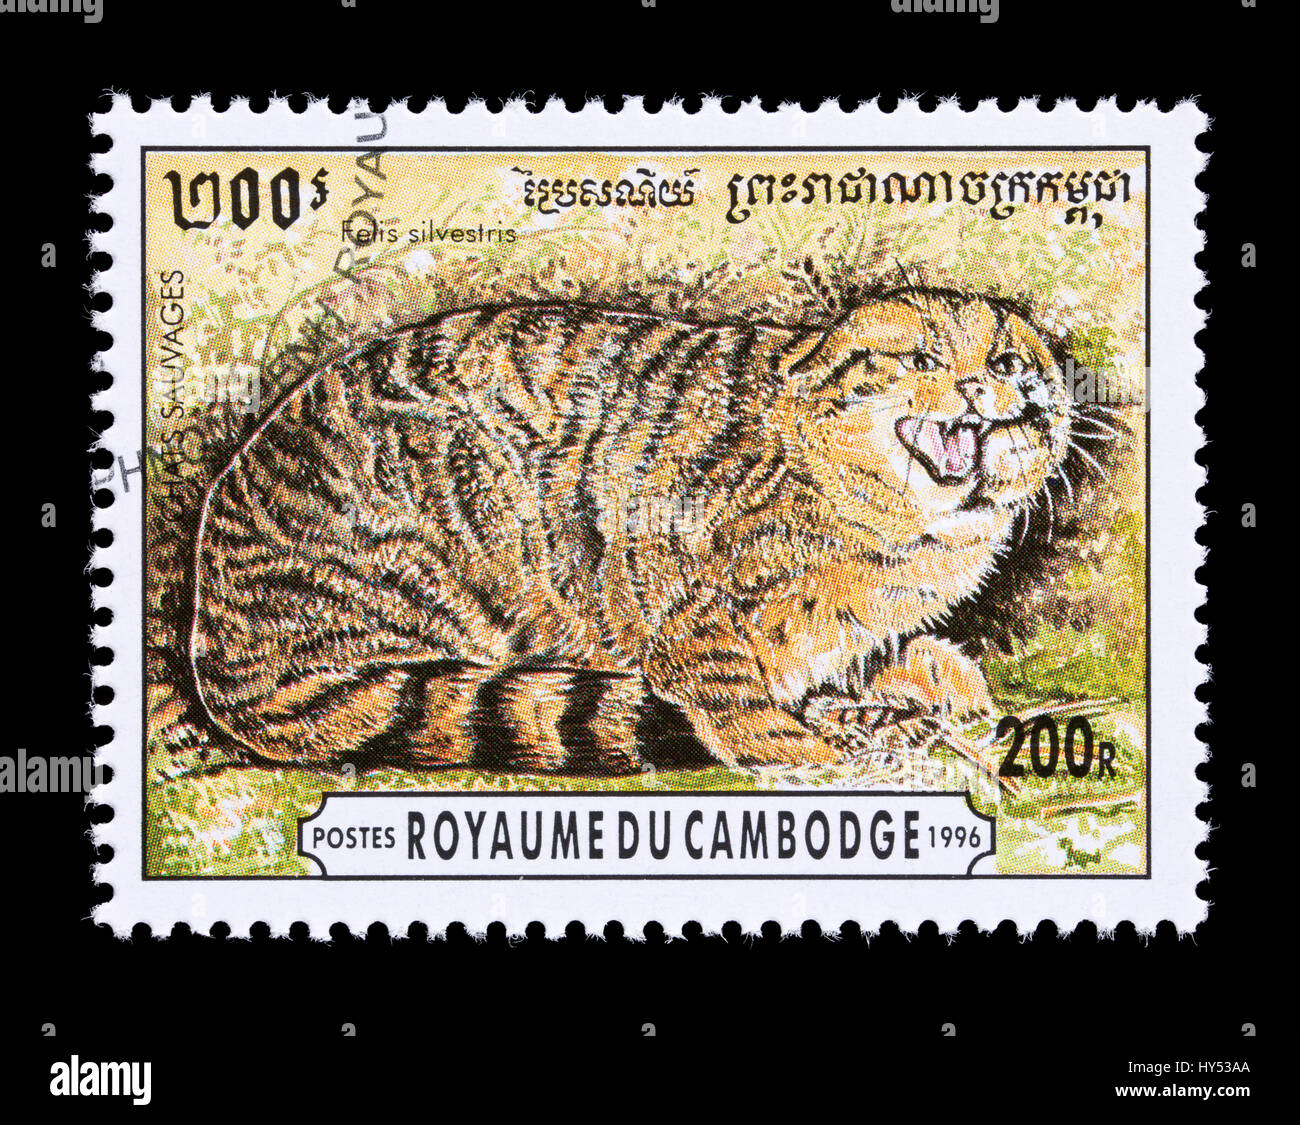 Postage stamp from Cambodia depicting a African wildcat (Felis silvestris), Stock Photo